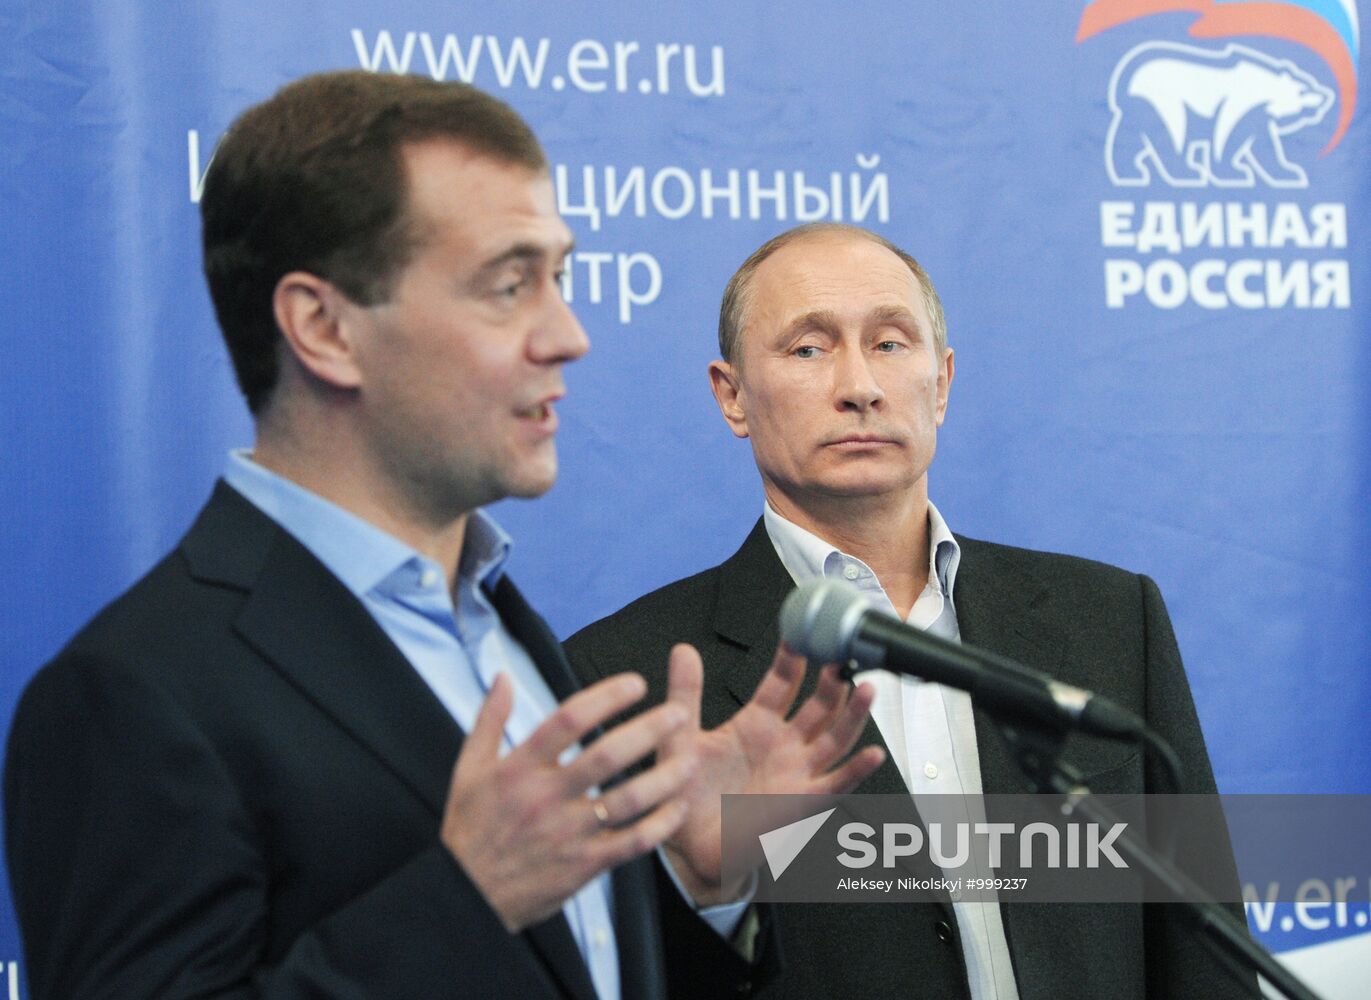 D. Medvedev and V. Putin at main United Russia headquarters